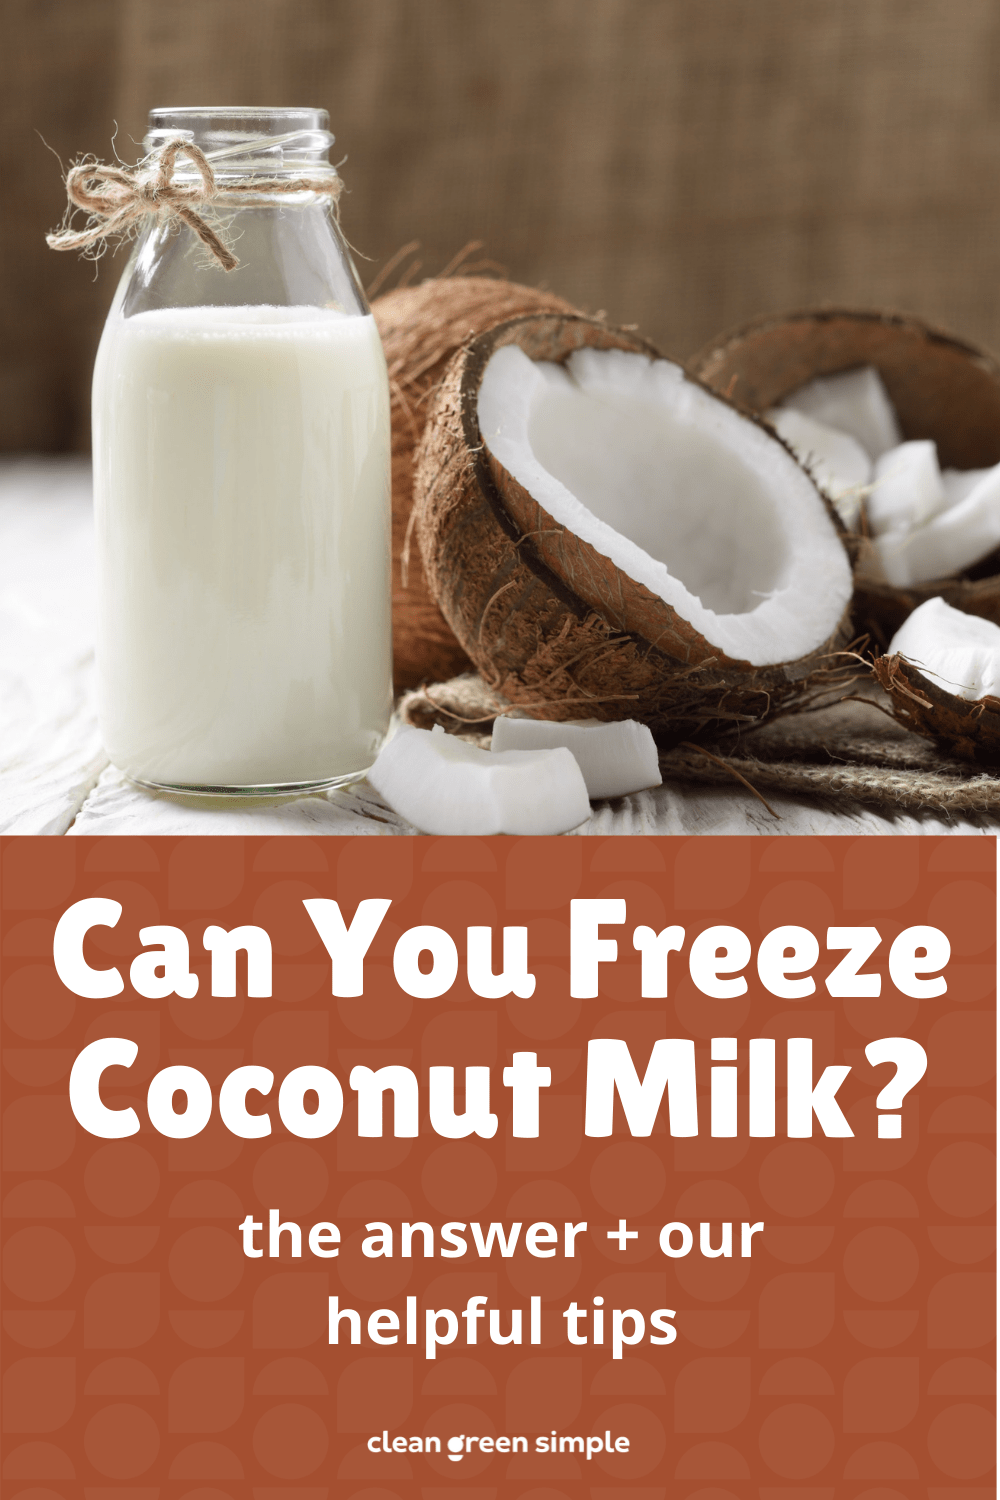 Can You Freeze Coconut Milk